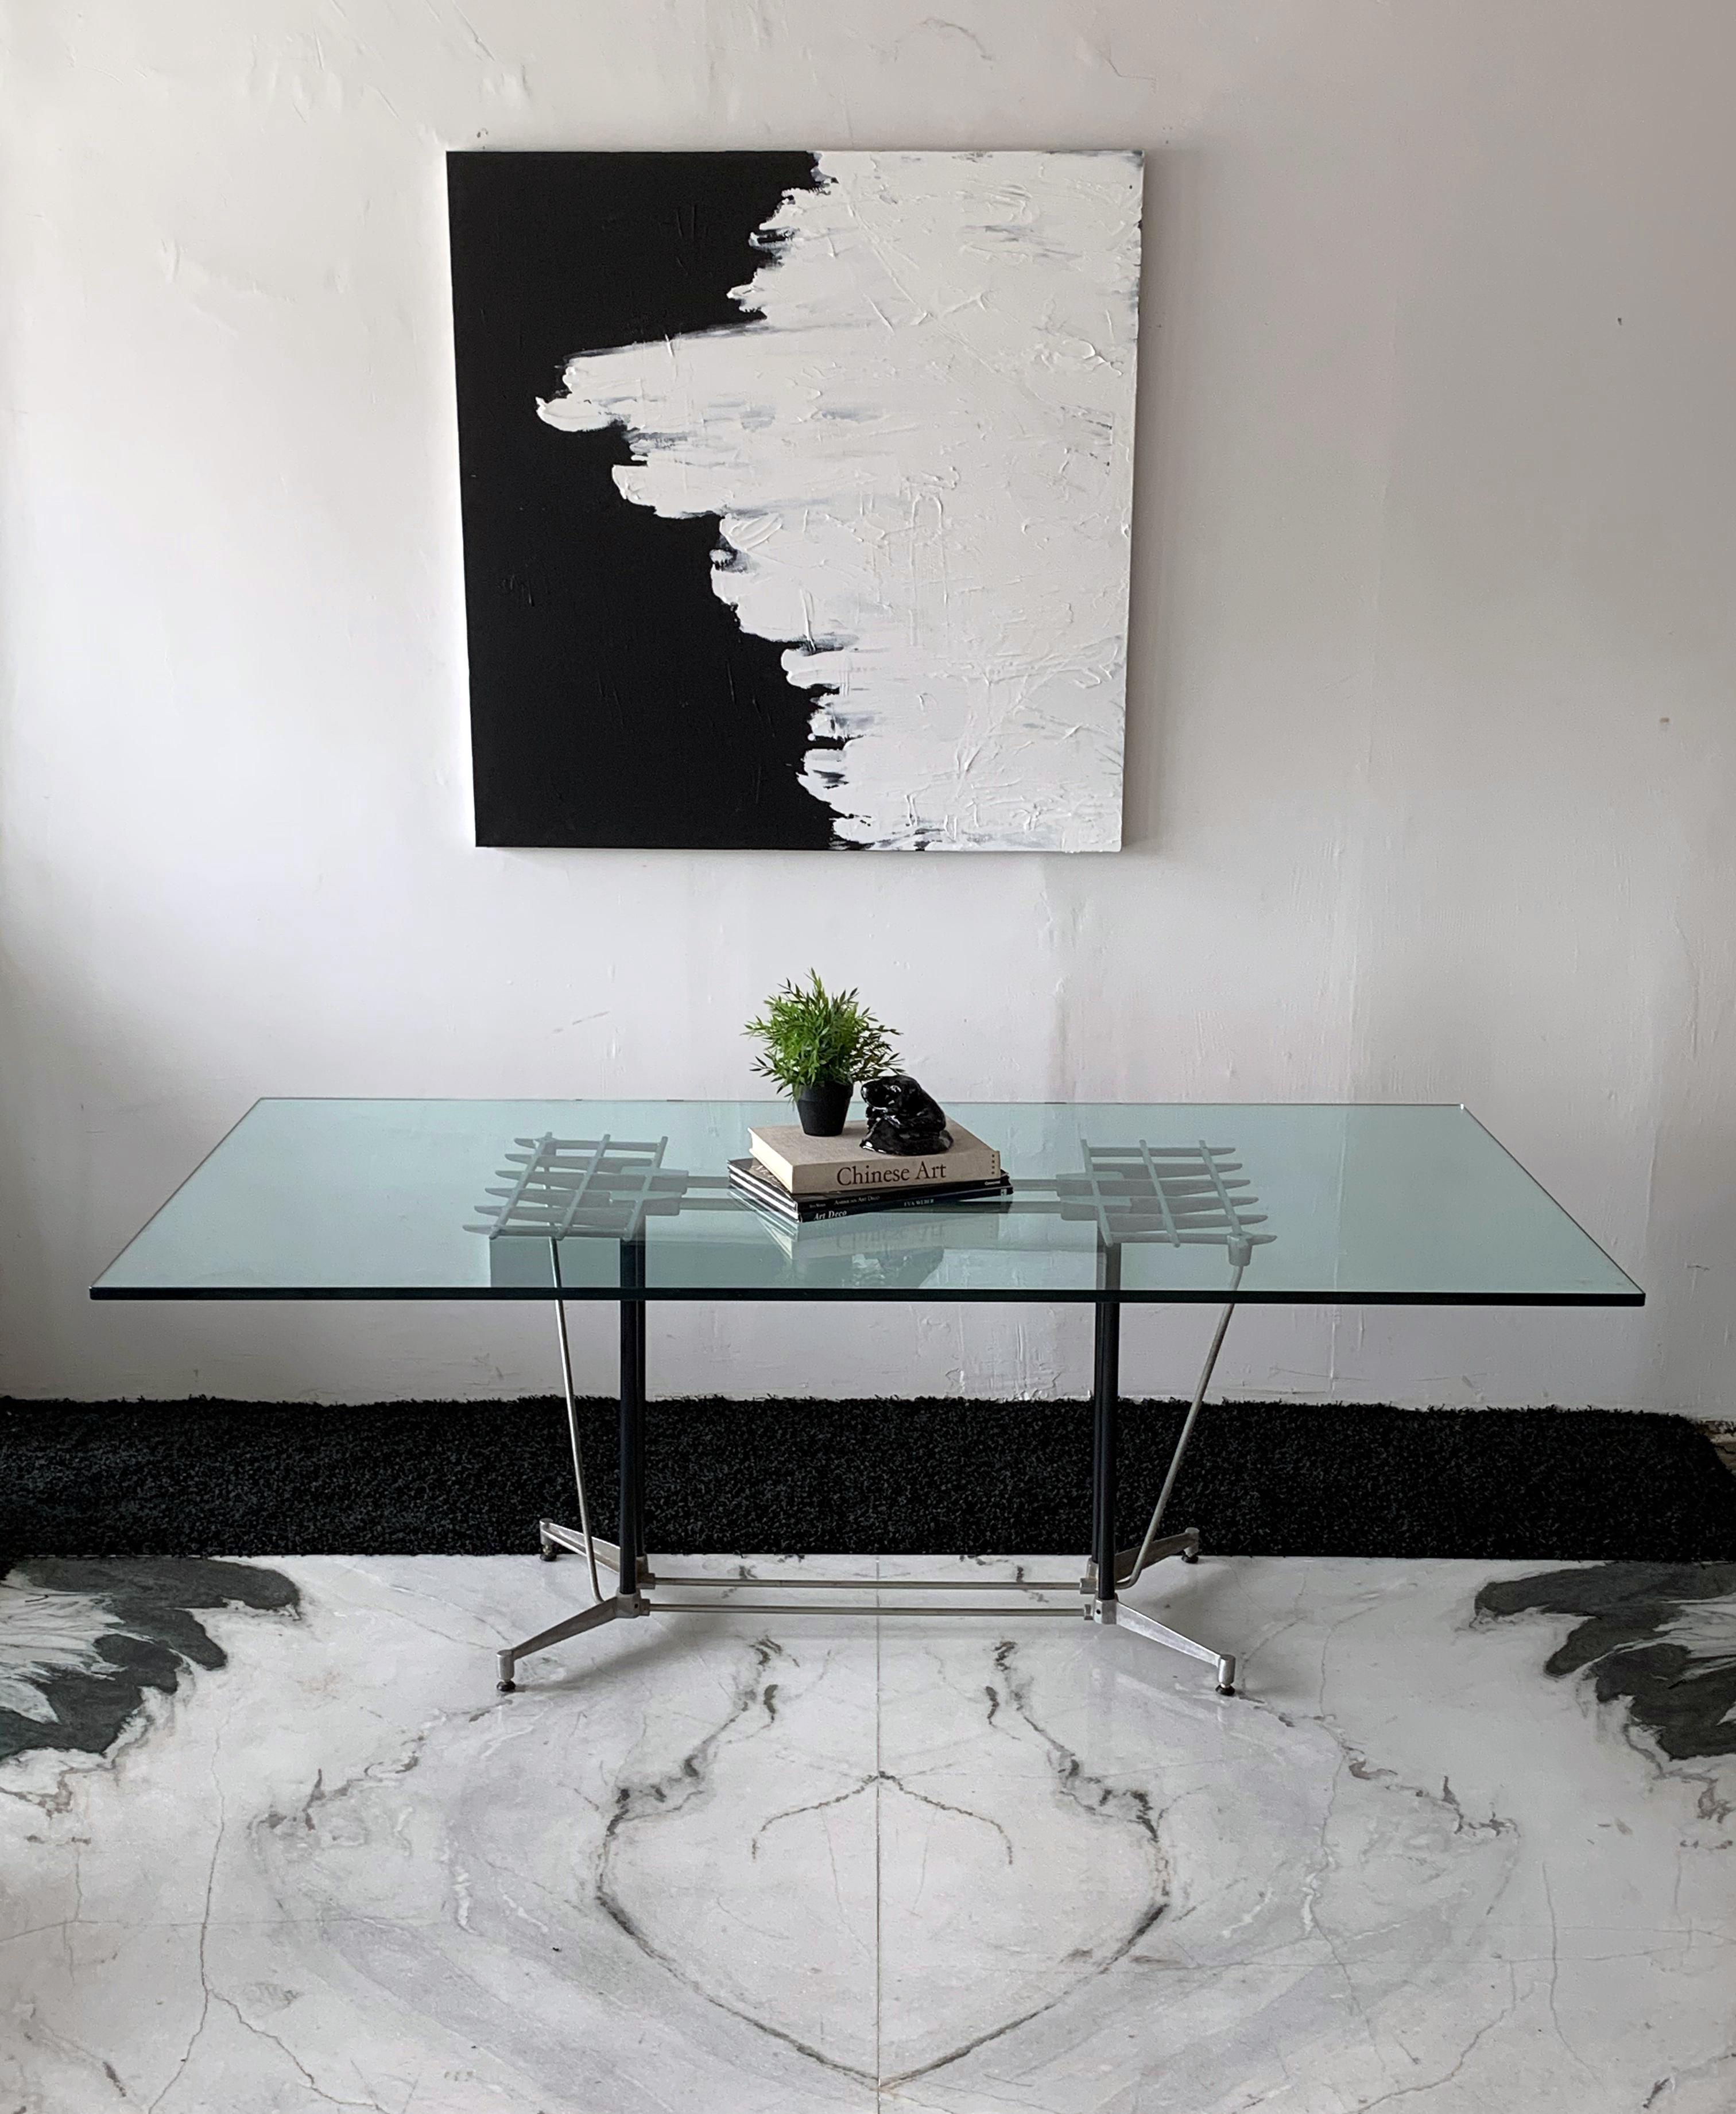 This dining table is equal parts post modern and industrial modern and just oozes California modernism. This dining table or writing desk was designed by Robert Josten in the 1970's. Made of aluminum, this metal grille / grid style is a staple of